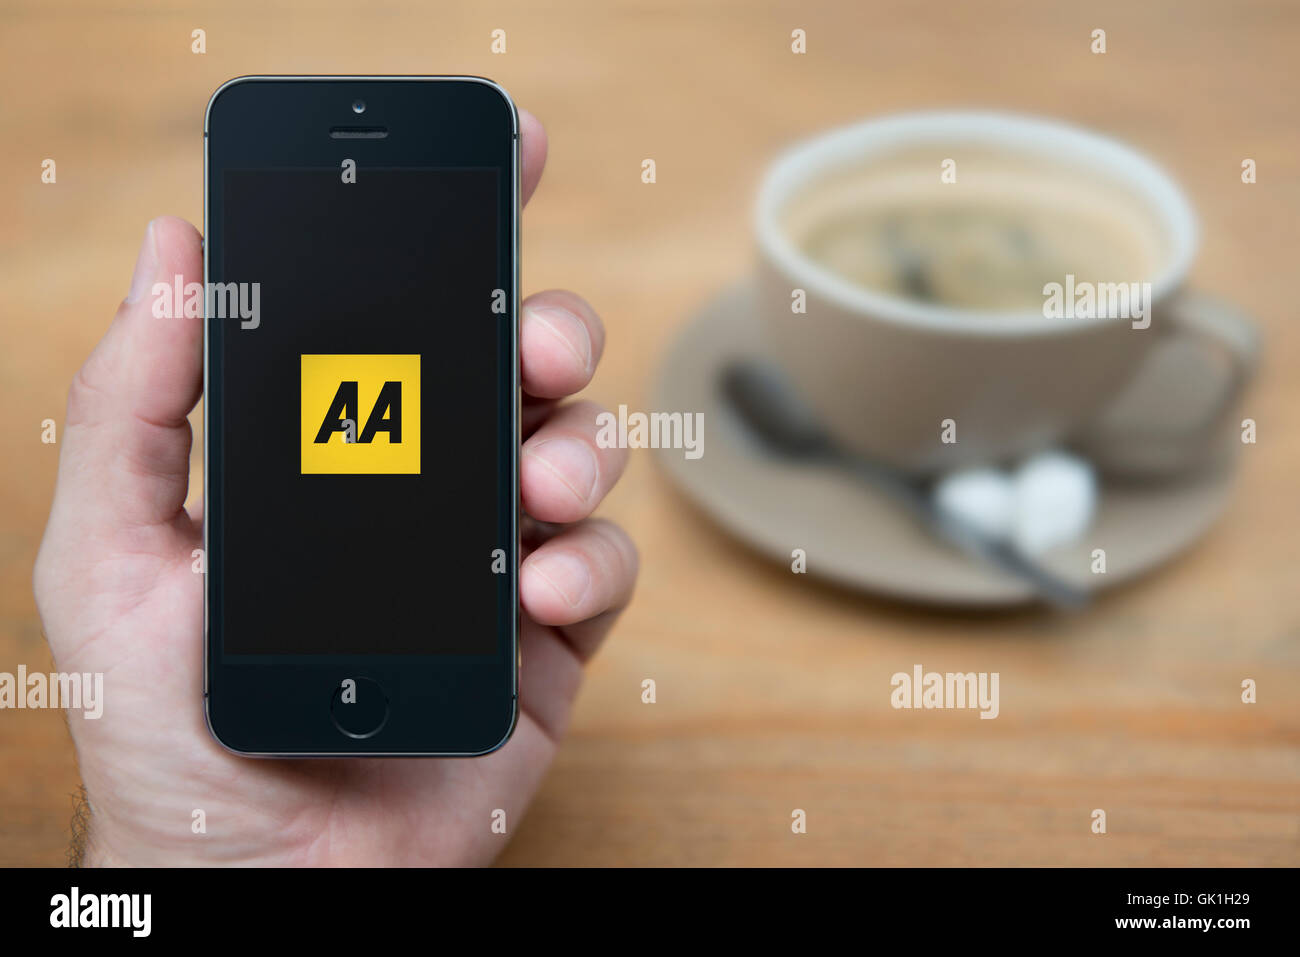 A man looks at his iPhone which displays the AA logo, while sat with a cup of coffee (Editorial use only). Stock Photo